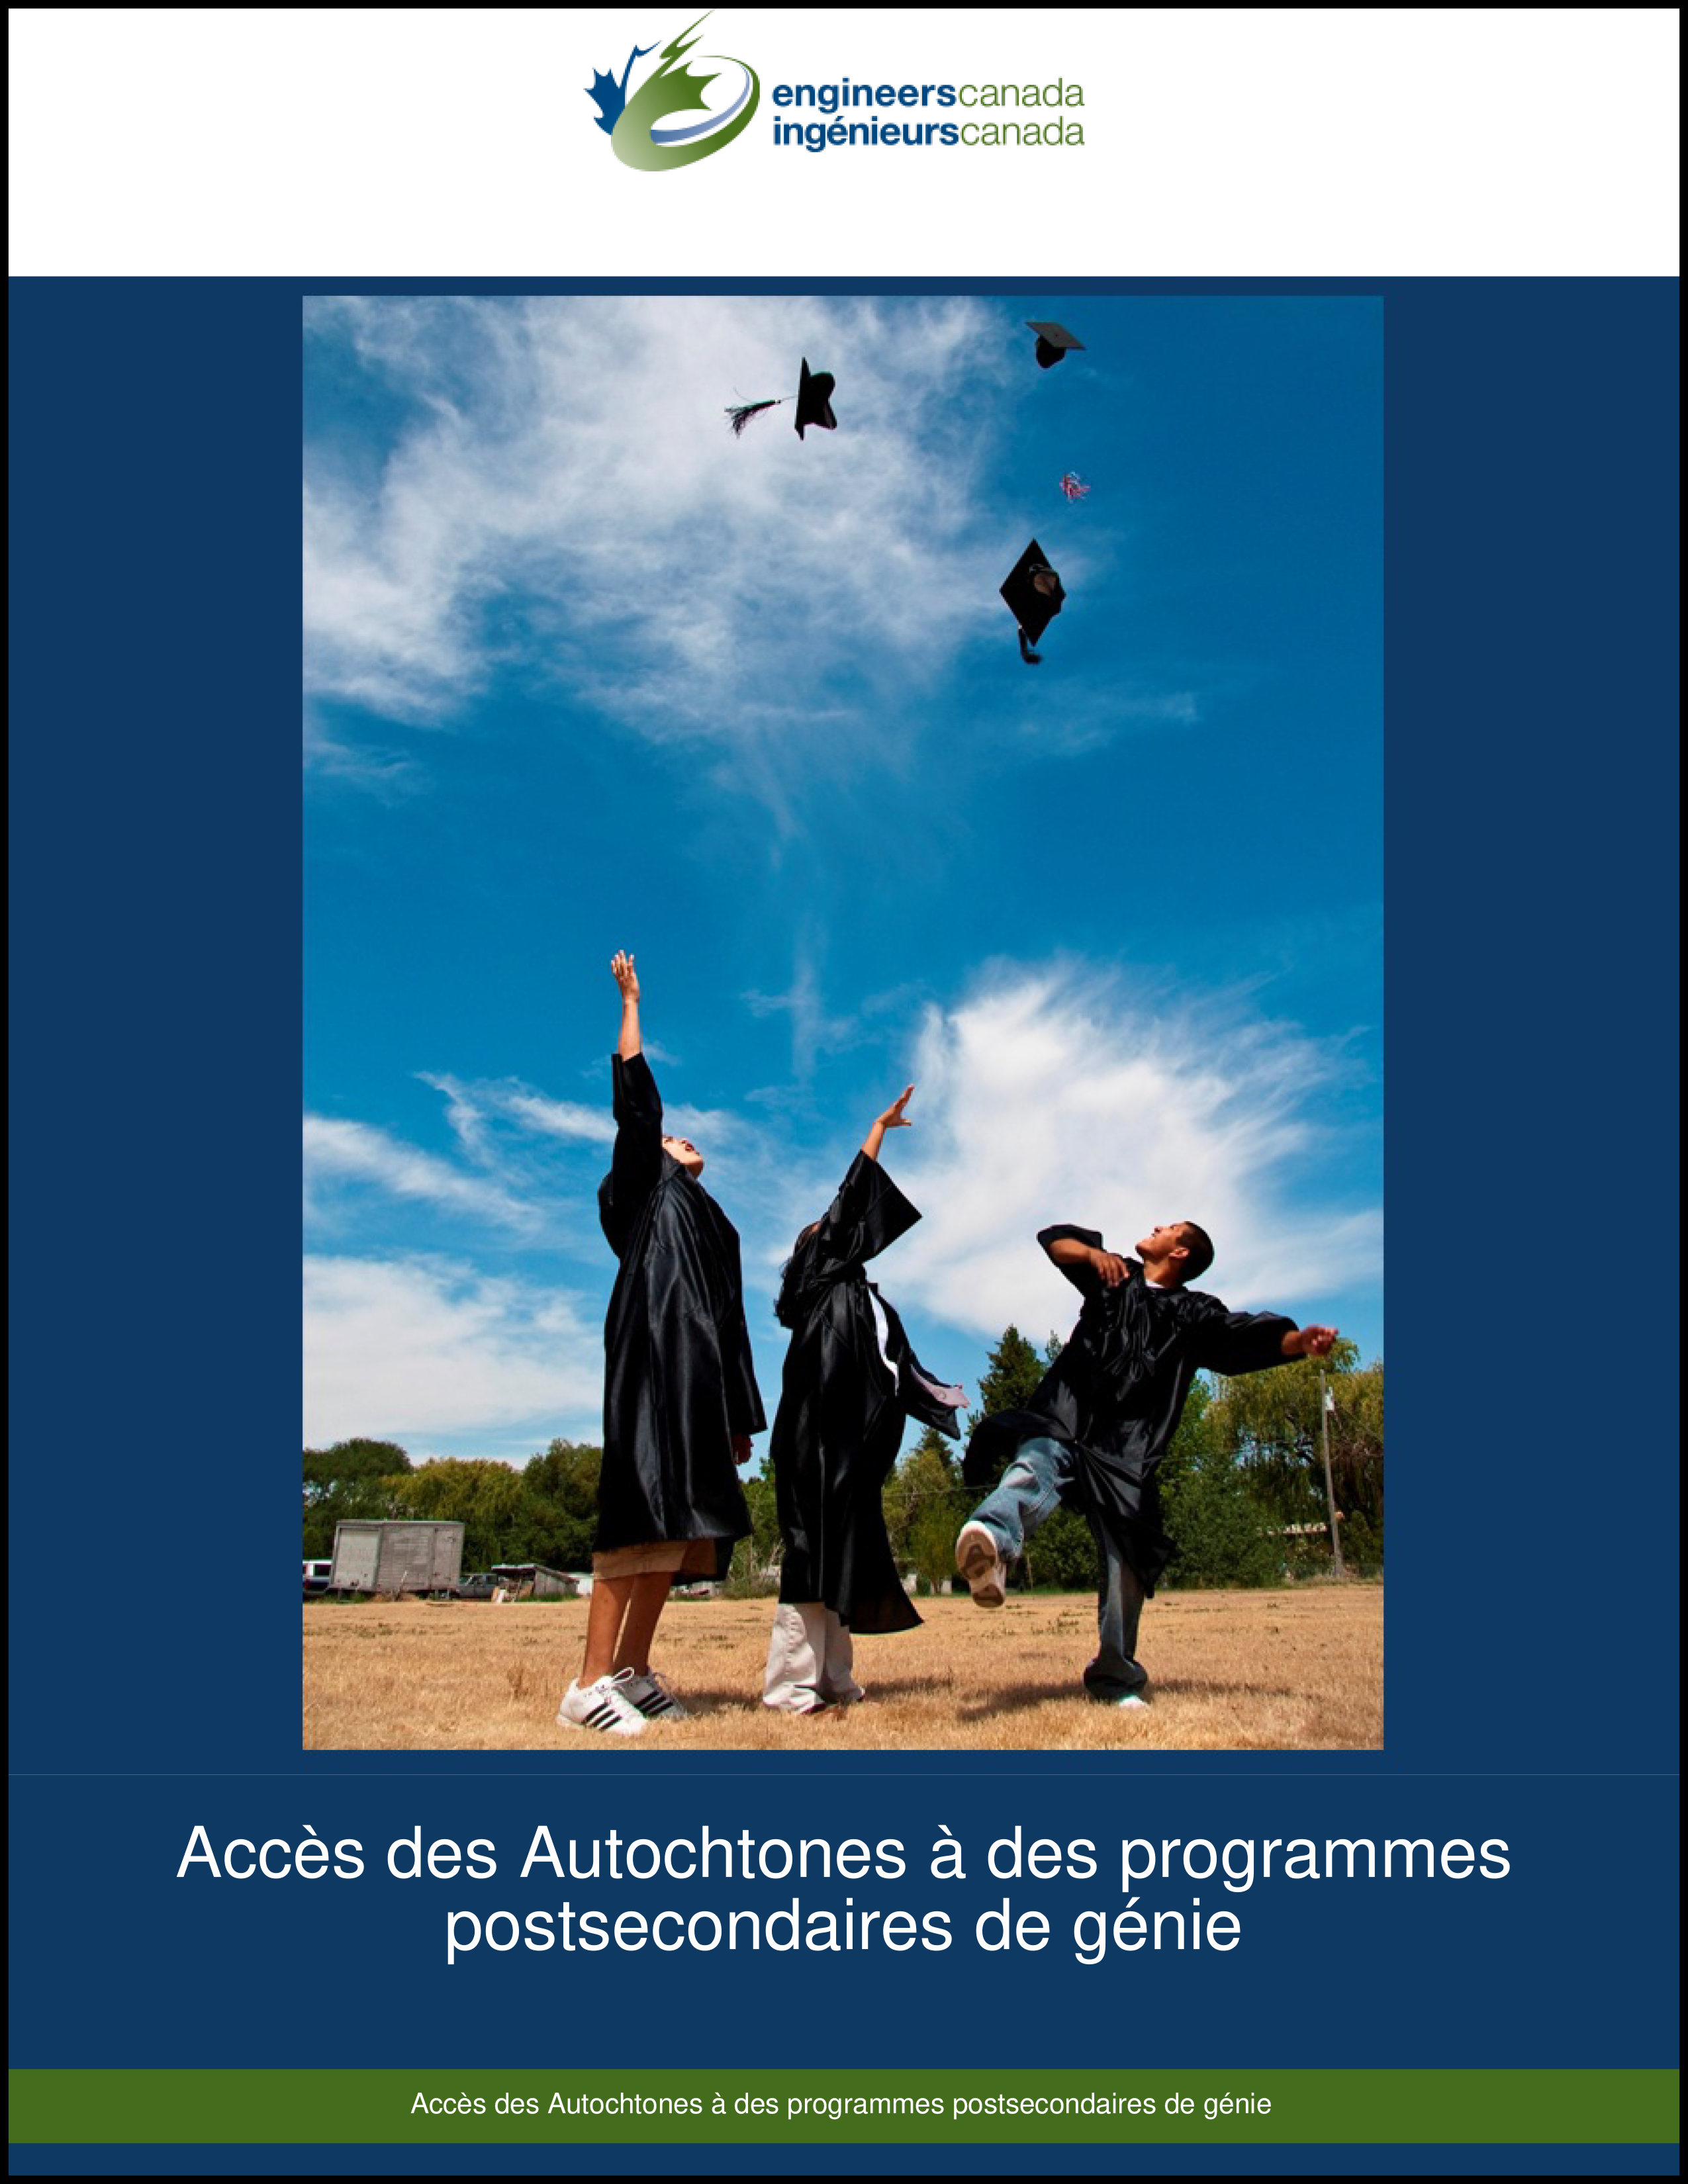 Indigenous Peoples’ Access to Post-Secondary Engineering Programs Coverpage in French